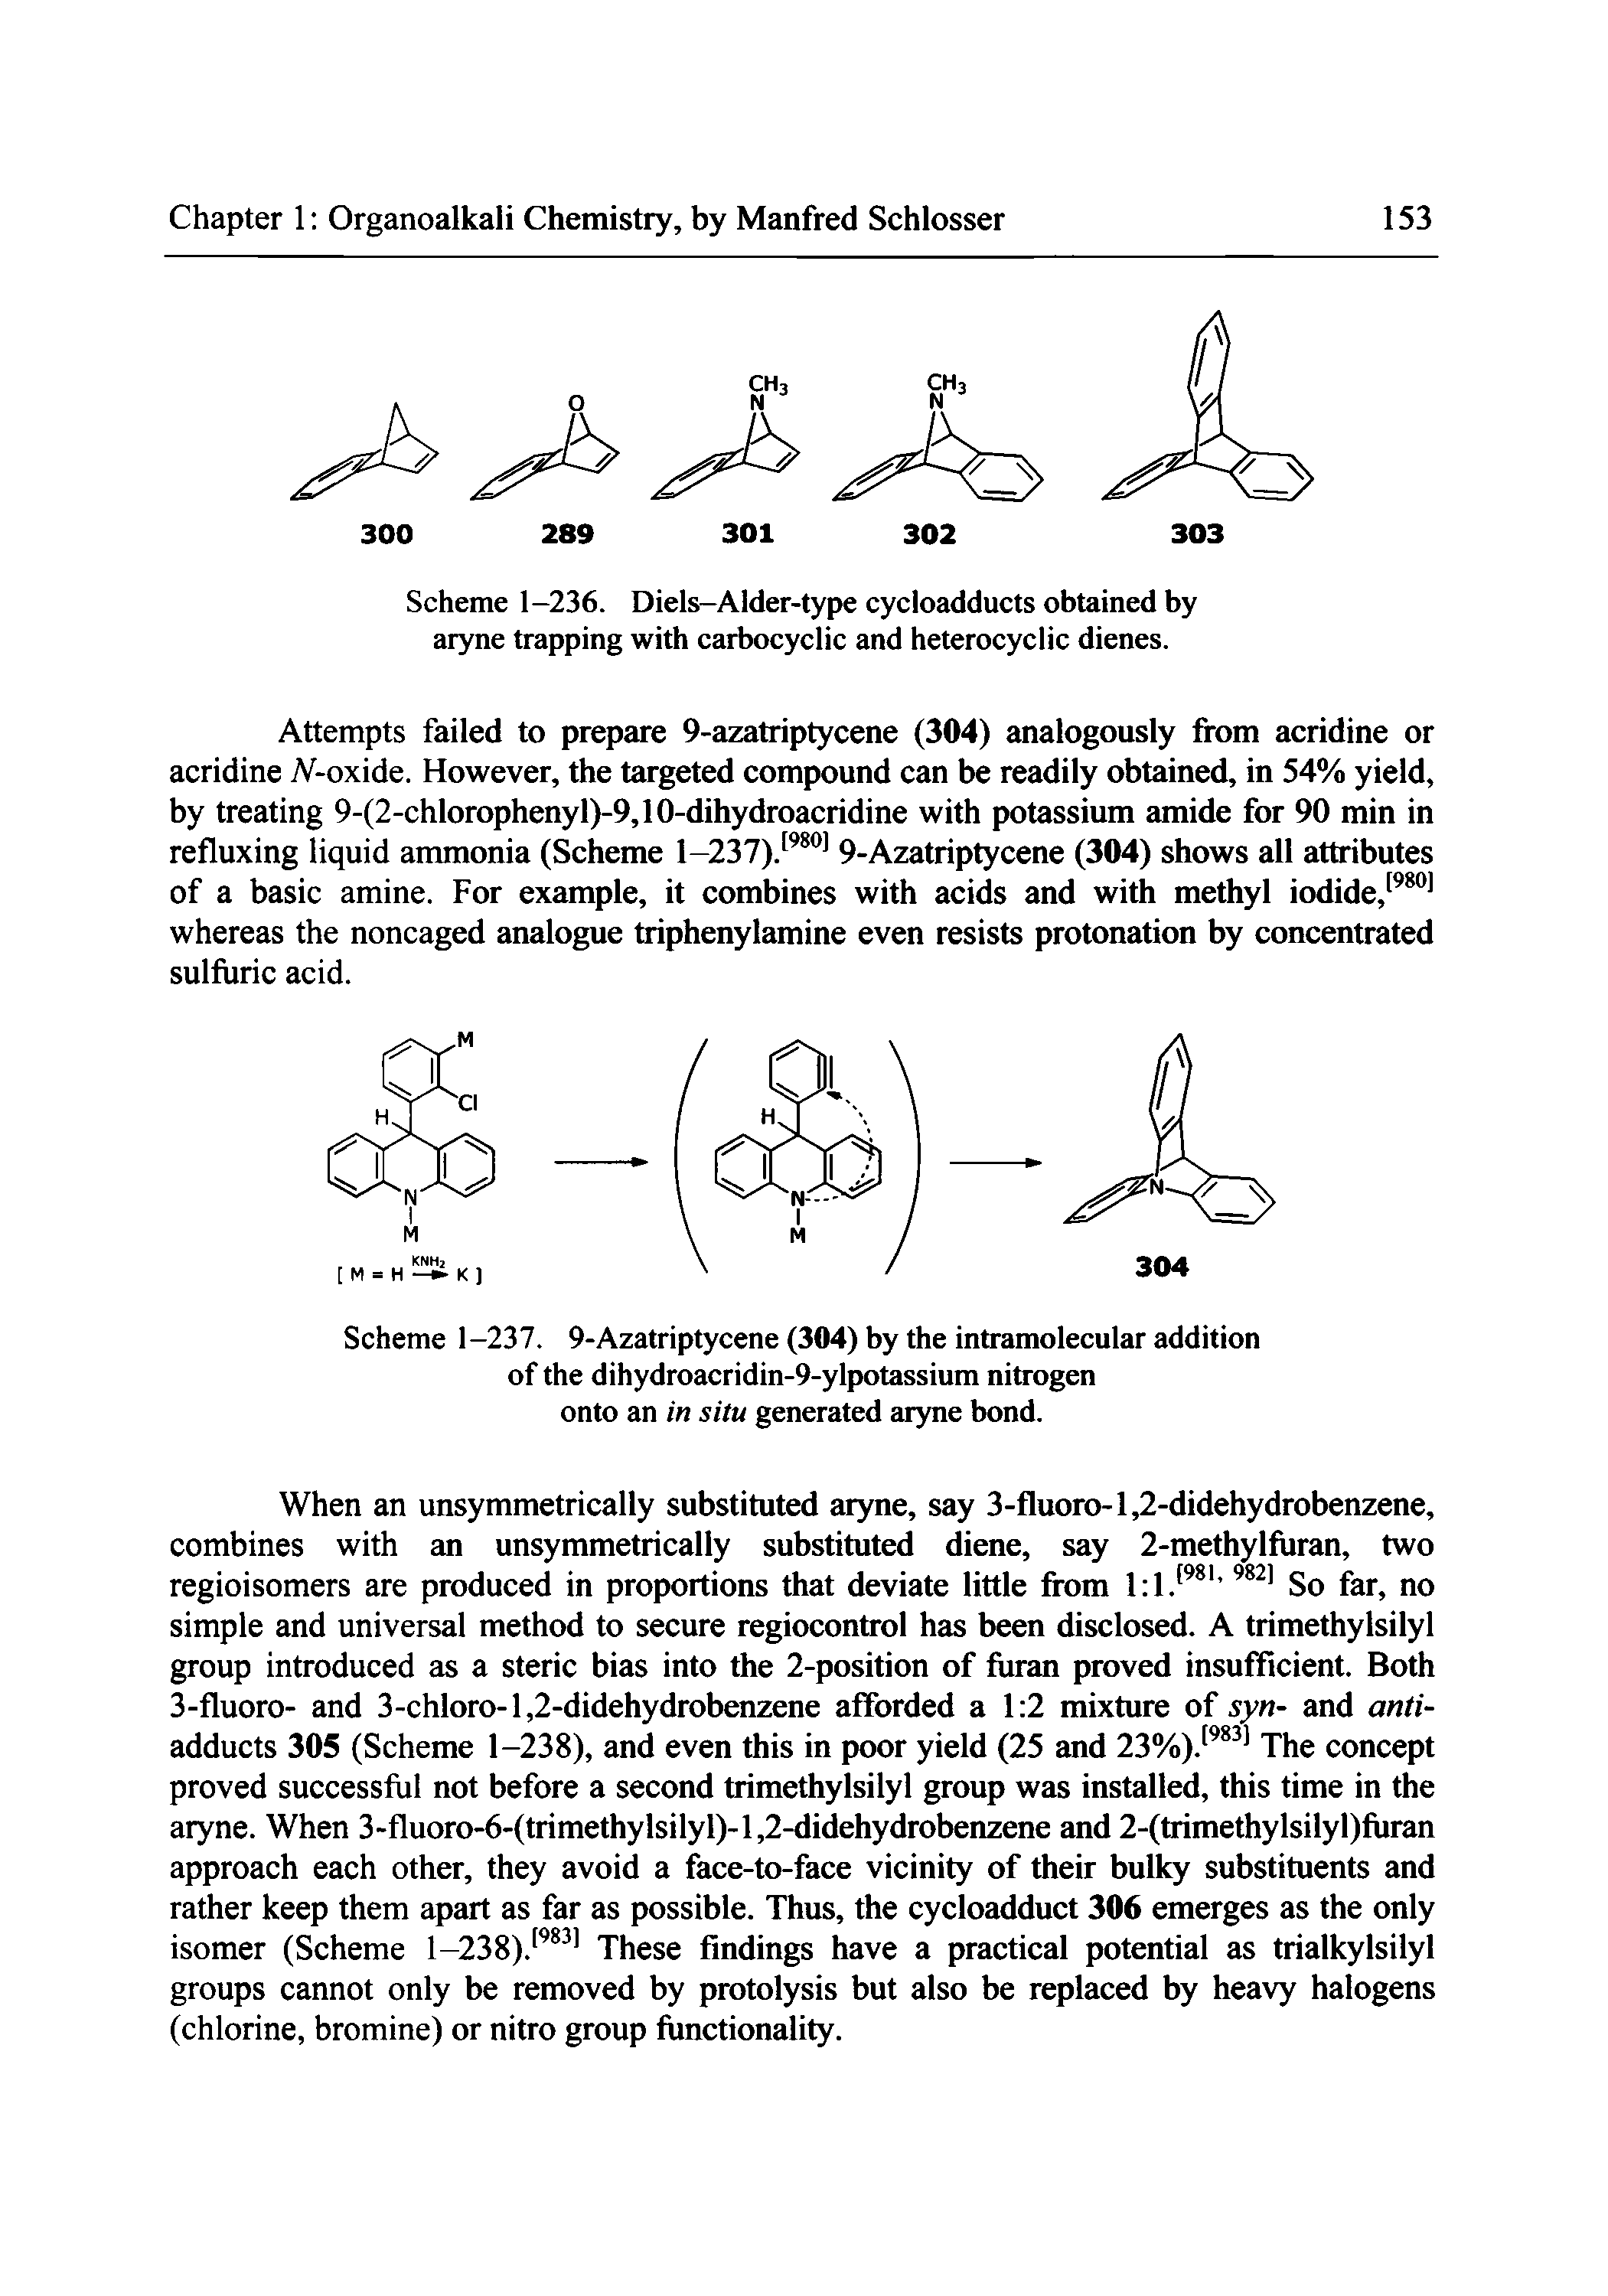 Scheme 1-236. Diels-Alder-type cycloadducts obtained by aryne trapping with caibocyclic and heterocyclic dienes.